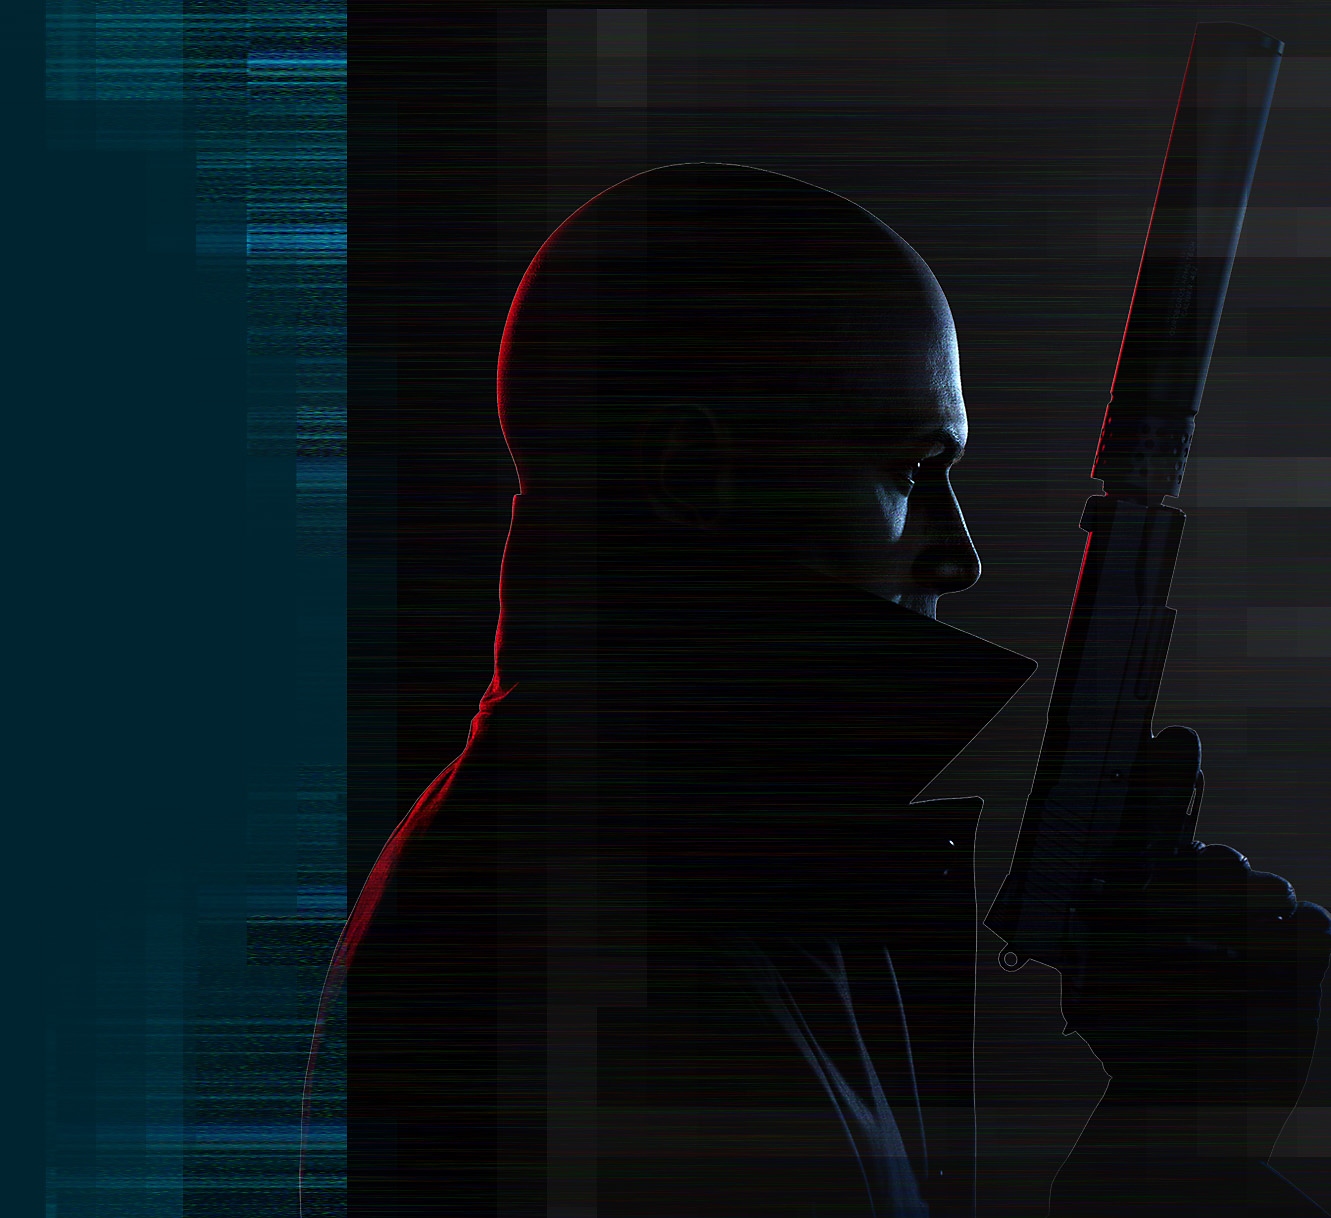 Artistic render of the character 'Agent 47' from Hitman 3 holding a silenced pistol